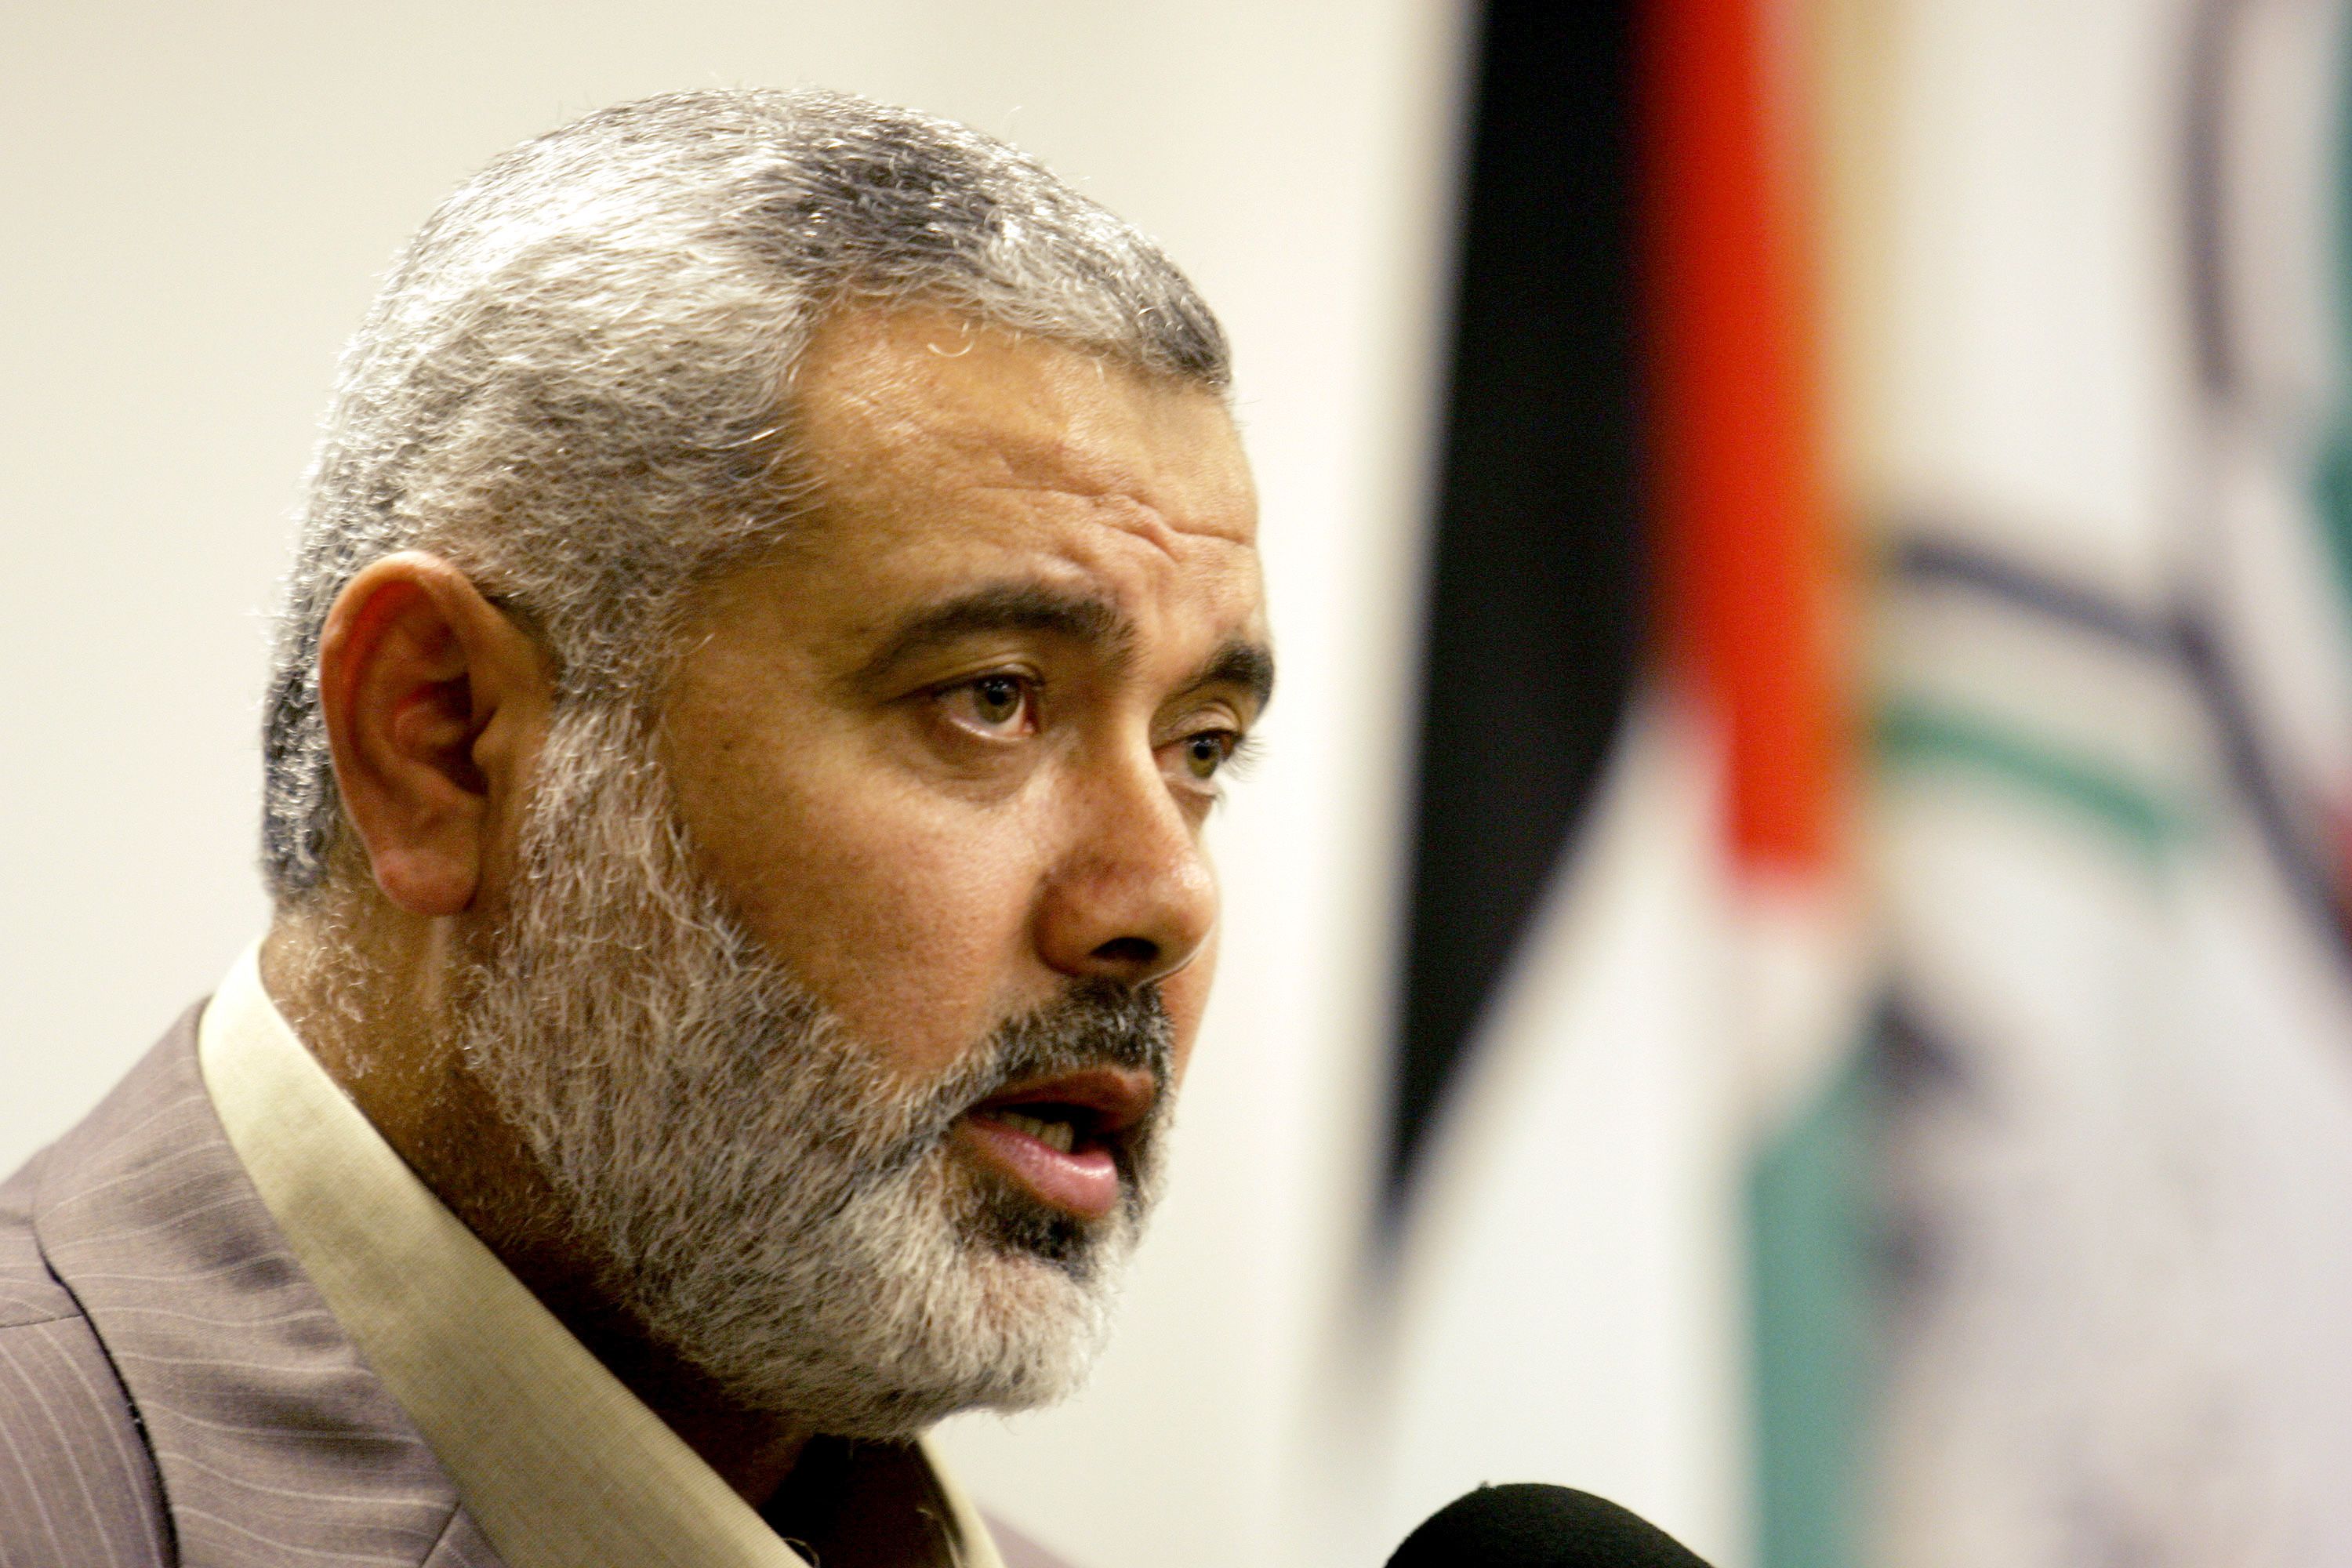 Israel says Hamas leader Yassin 'marked for death